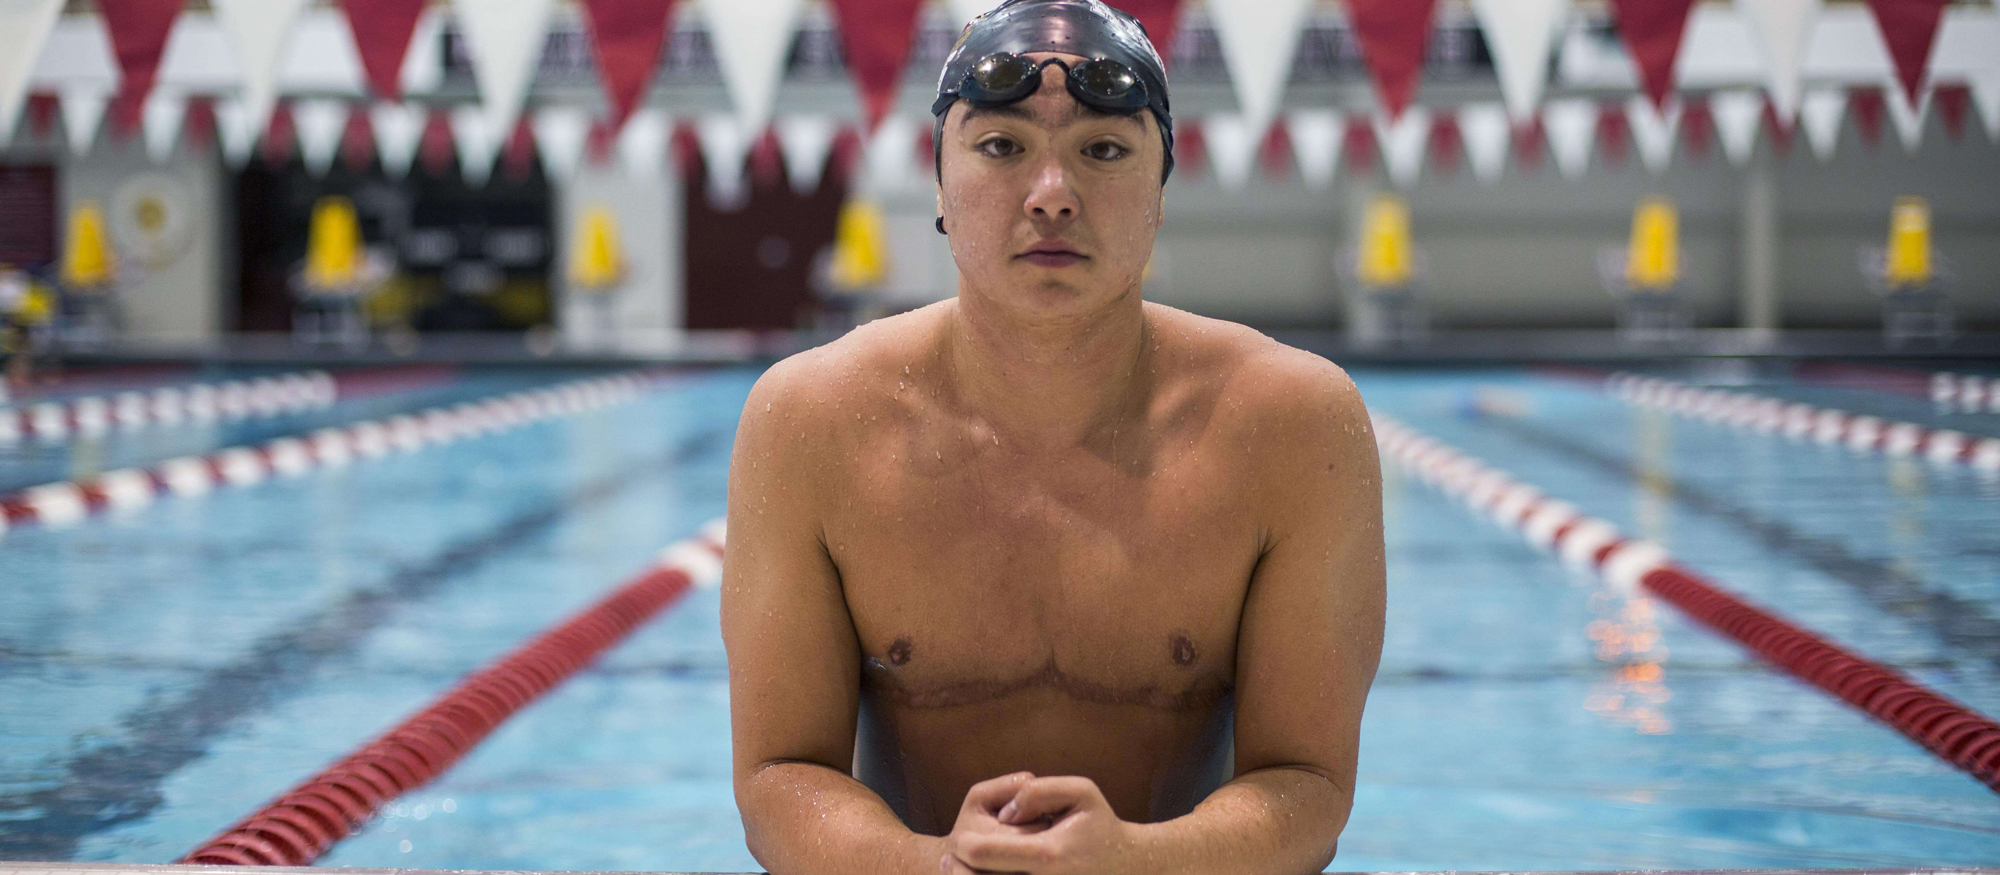 Pioneering transgender athlete Schuyler Bailar will speak at Mount Holyoke College on Tuesday, March 28th in Chapin Auditorium in an event driven by the SAAC Diversity, Equity, and Inclusion Subcommittee. (Sydney Claire Photography/used with permission)